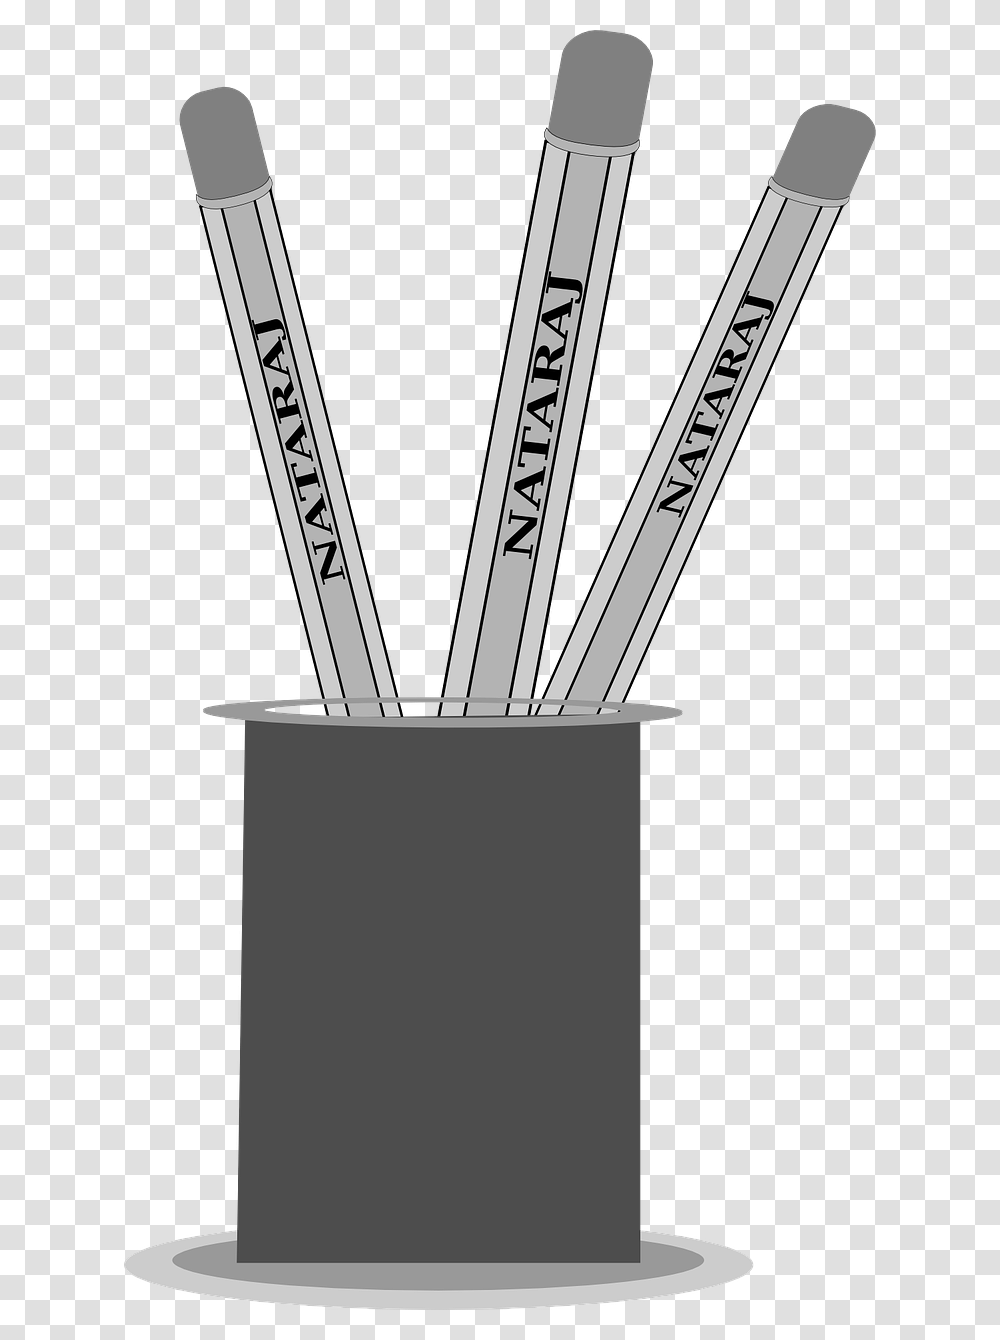 Pencils Stand Black And White Transparent Png